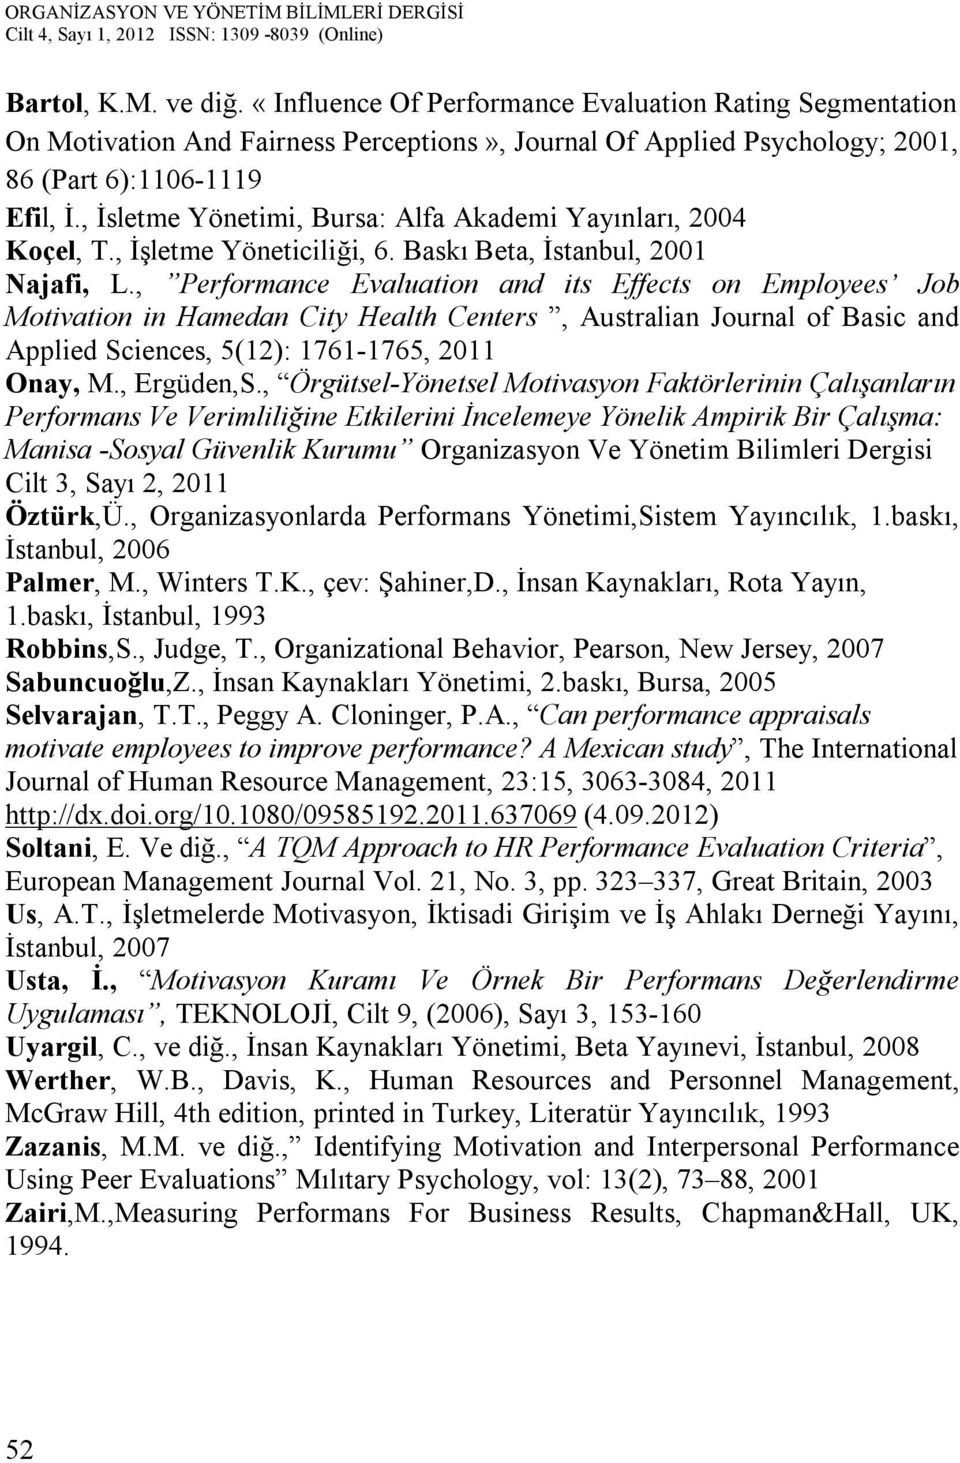 , Performance Evaluation and its Effects on Employees Job Motivation in Hamedan City Health Centers, Australian Journal of Basic and Applied Sciences, 5(12): 1761-1765, 2011 Onay, M., Ergüden,S.